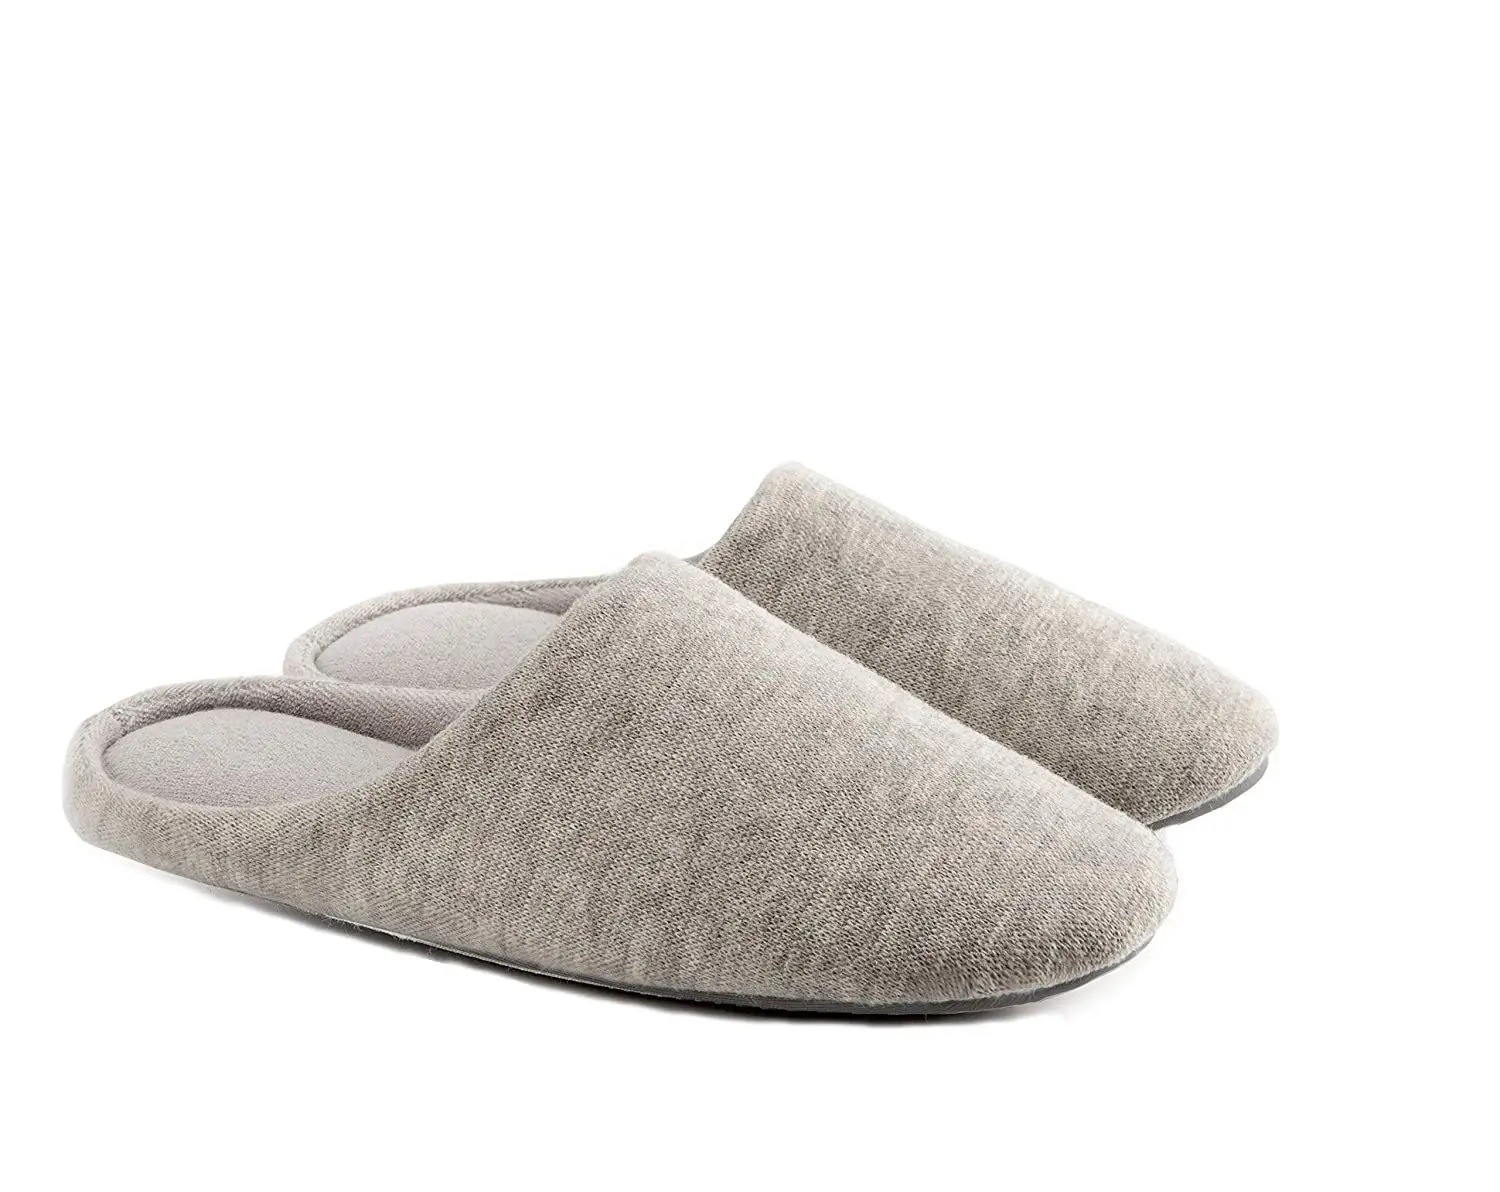 Cheap Bedroom Slippers, find Bedroom Slippers deals on line at Alibaba.com